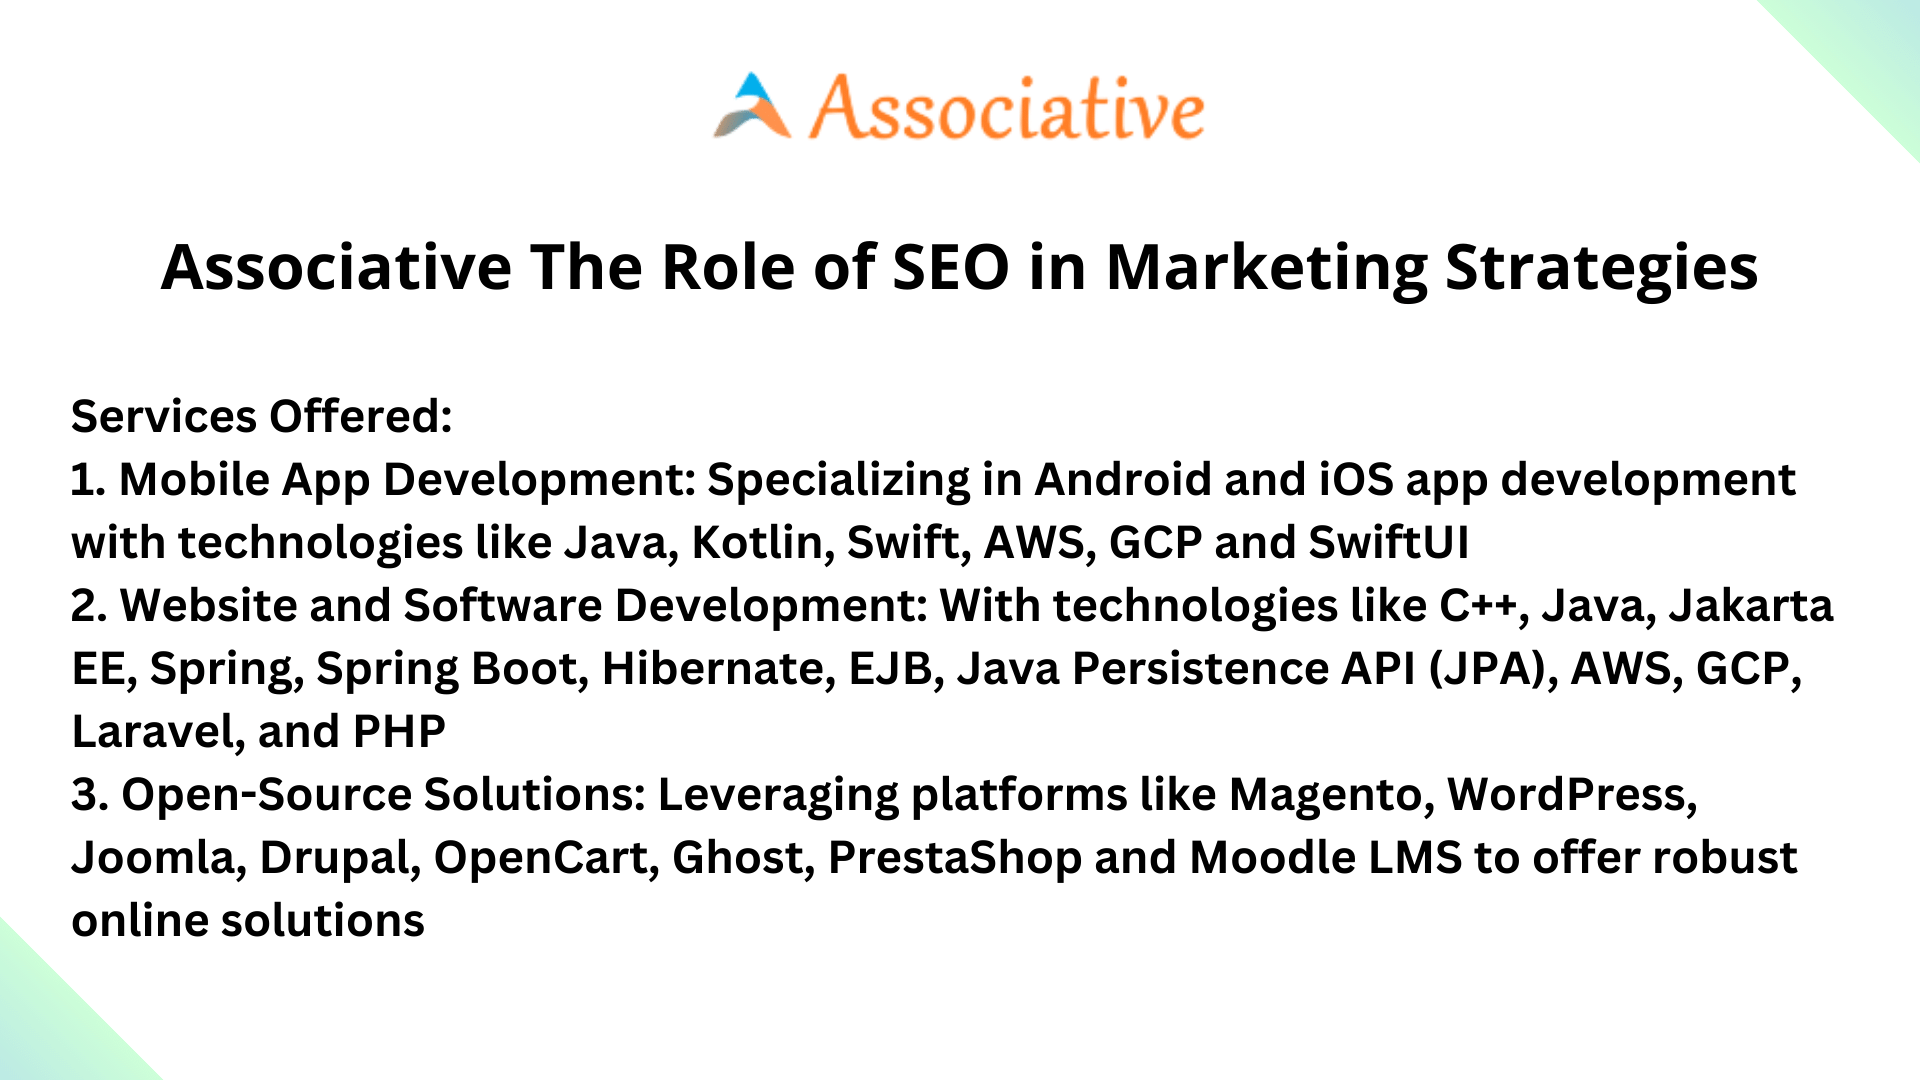 Associative The Role of SEO in Marketing Strategies